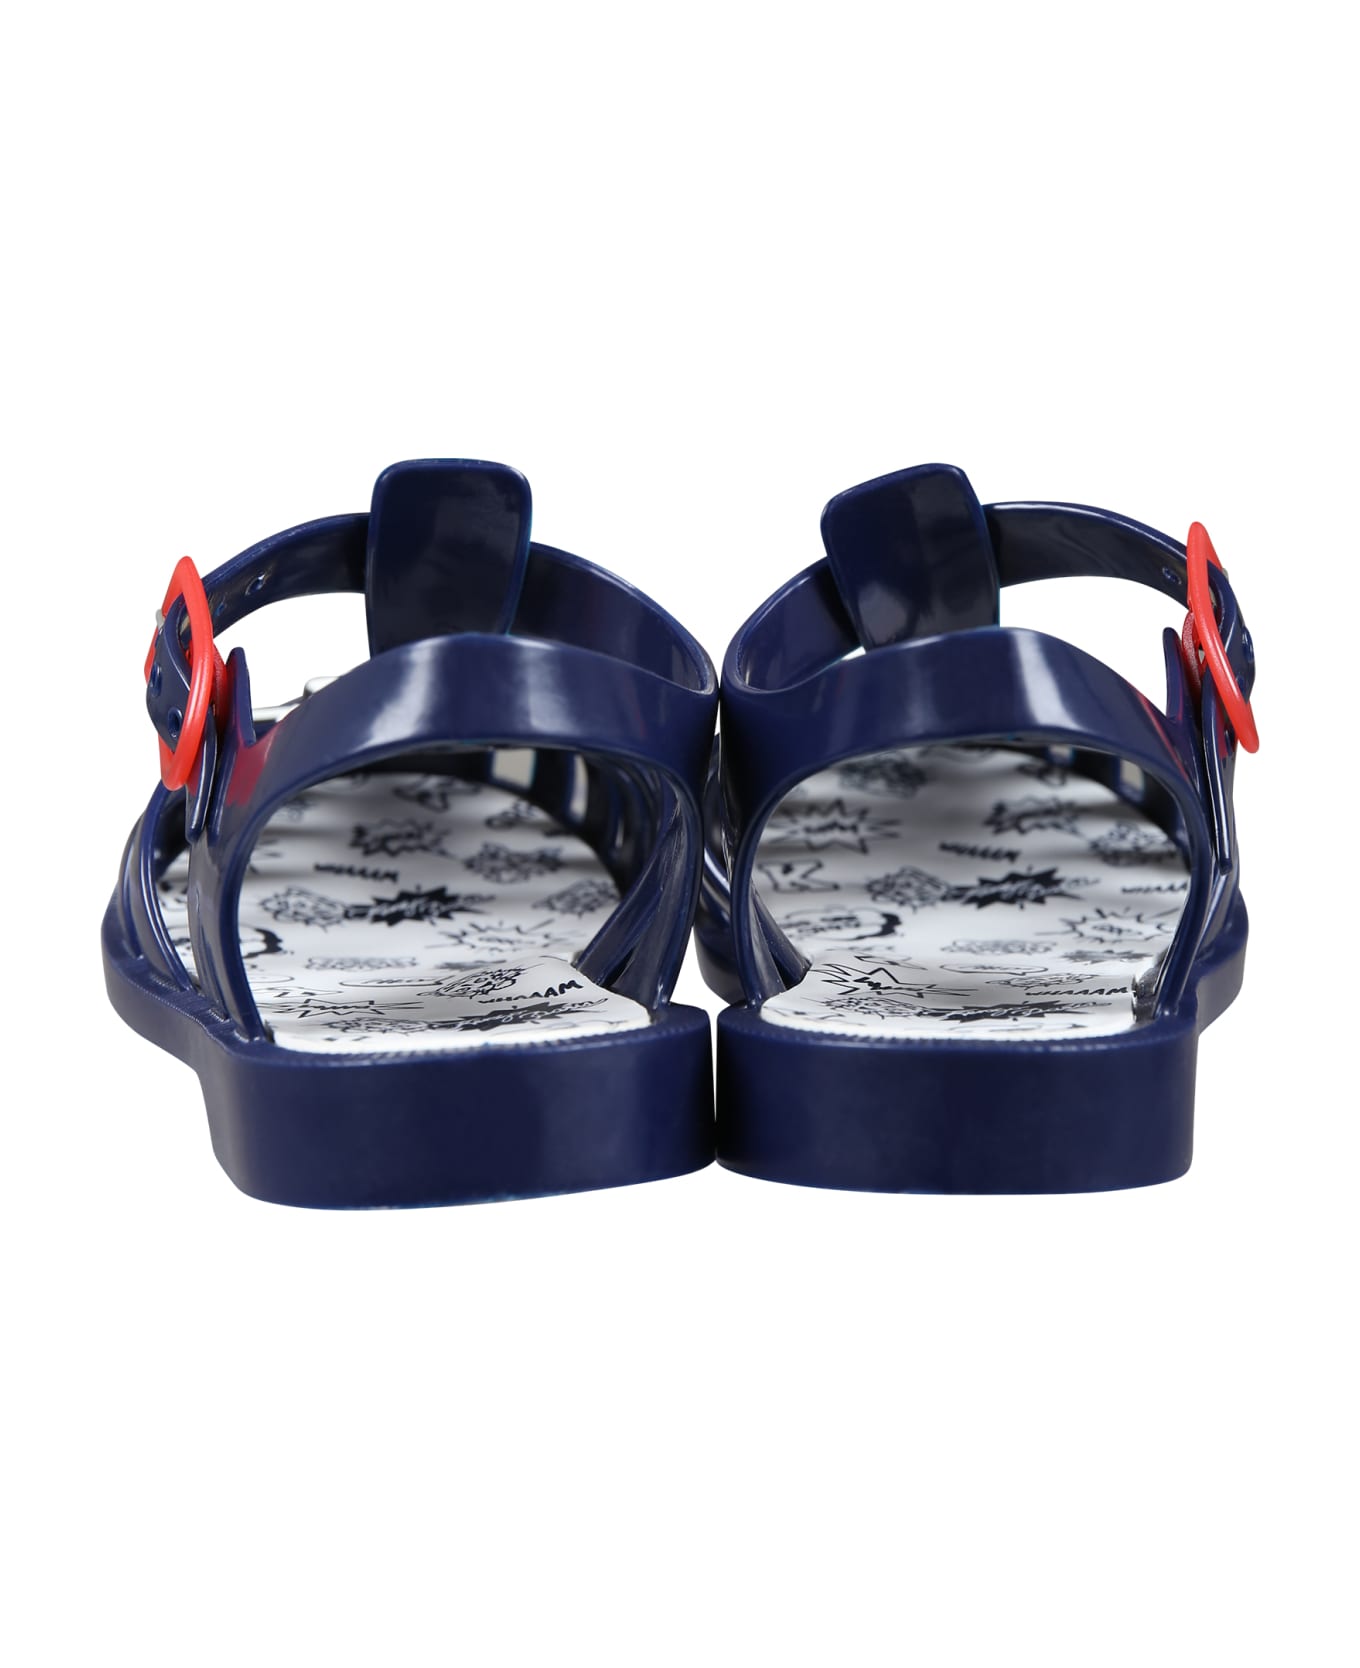 Kenzo Kids Blue Sandals For Boy With Tiger - Blu シューズ